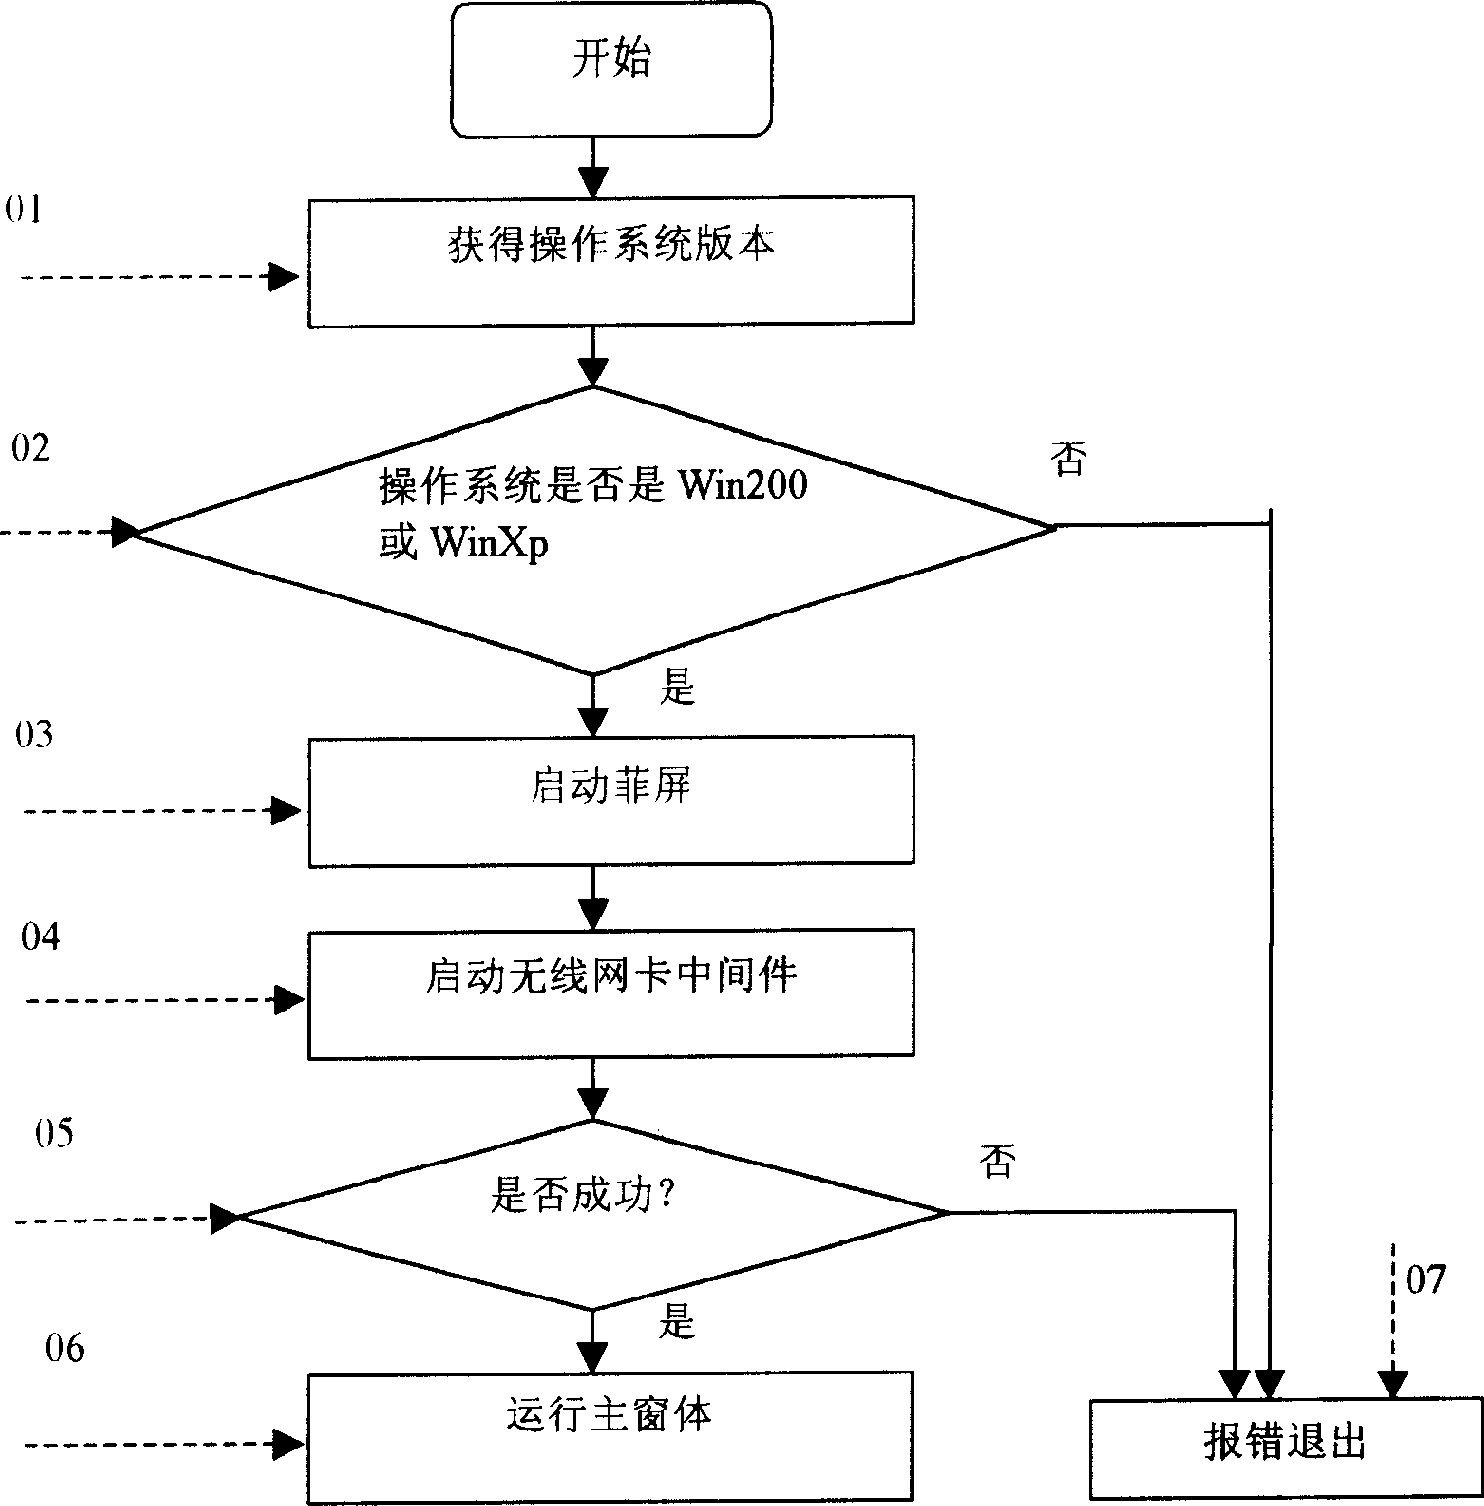 Method for realizing universal configuration of wireless network card based on 802.11 standard